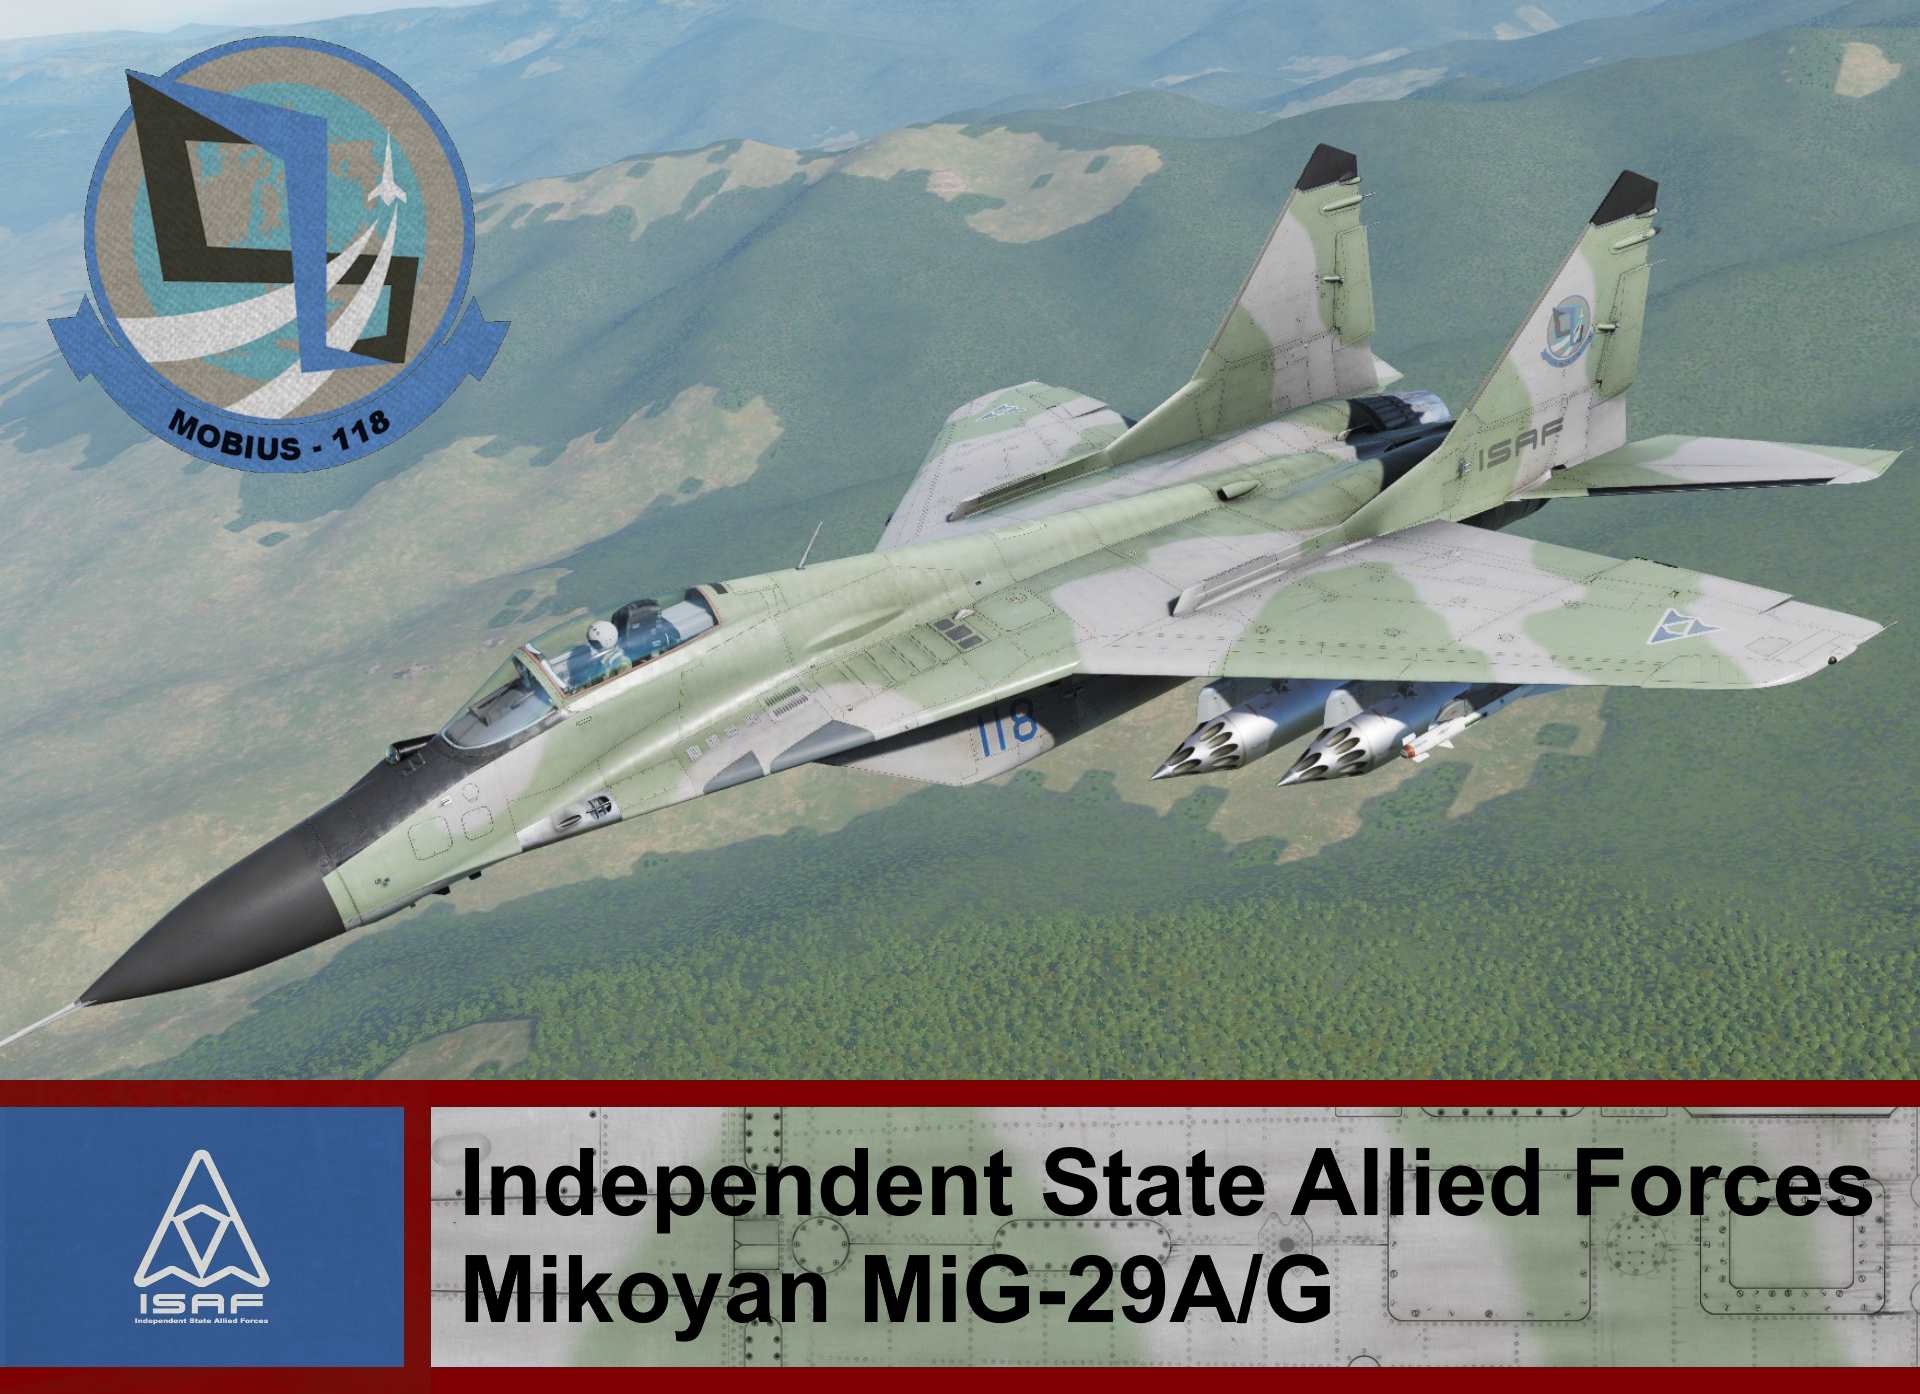 Independent State Allied Forces Mig-29A/G - Ace Combat 4 (Mobius One)